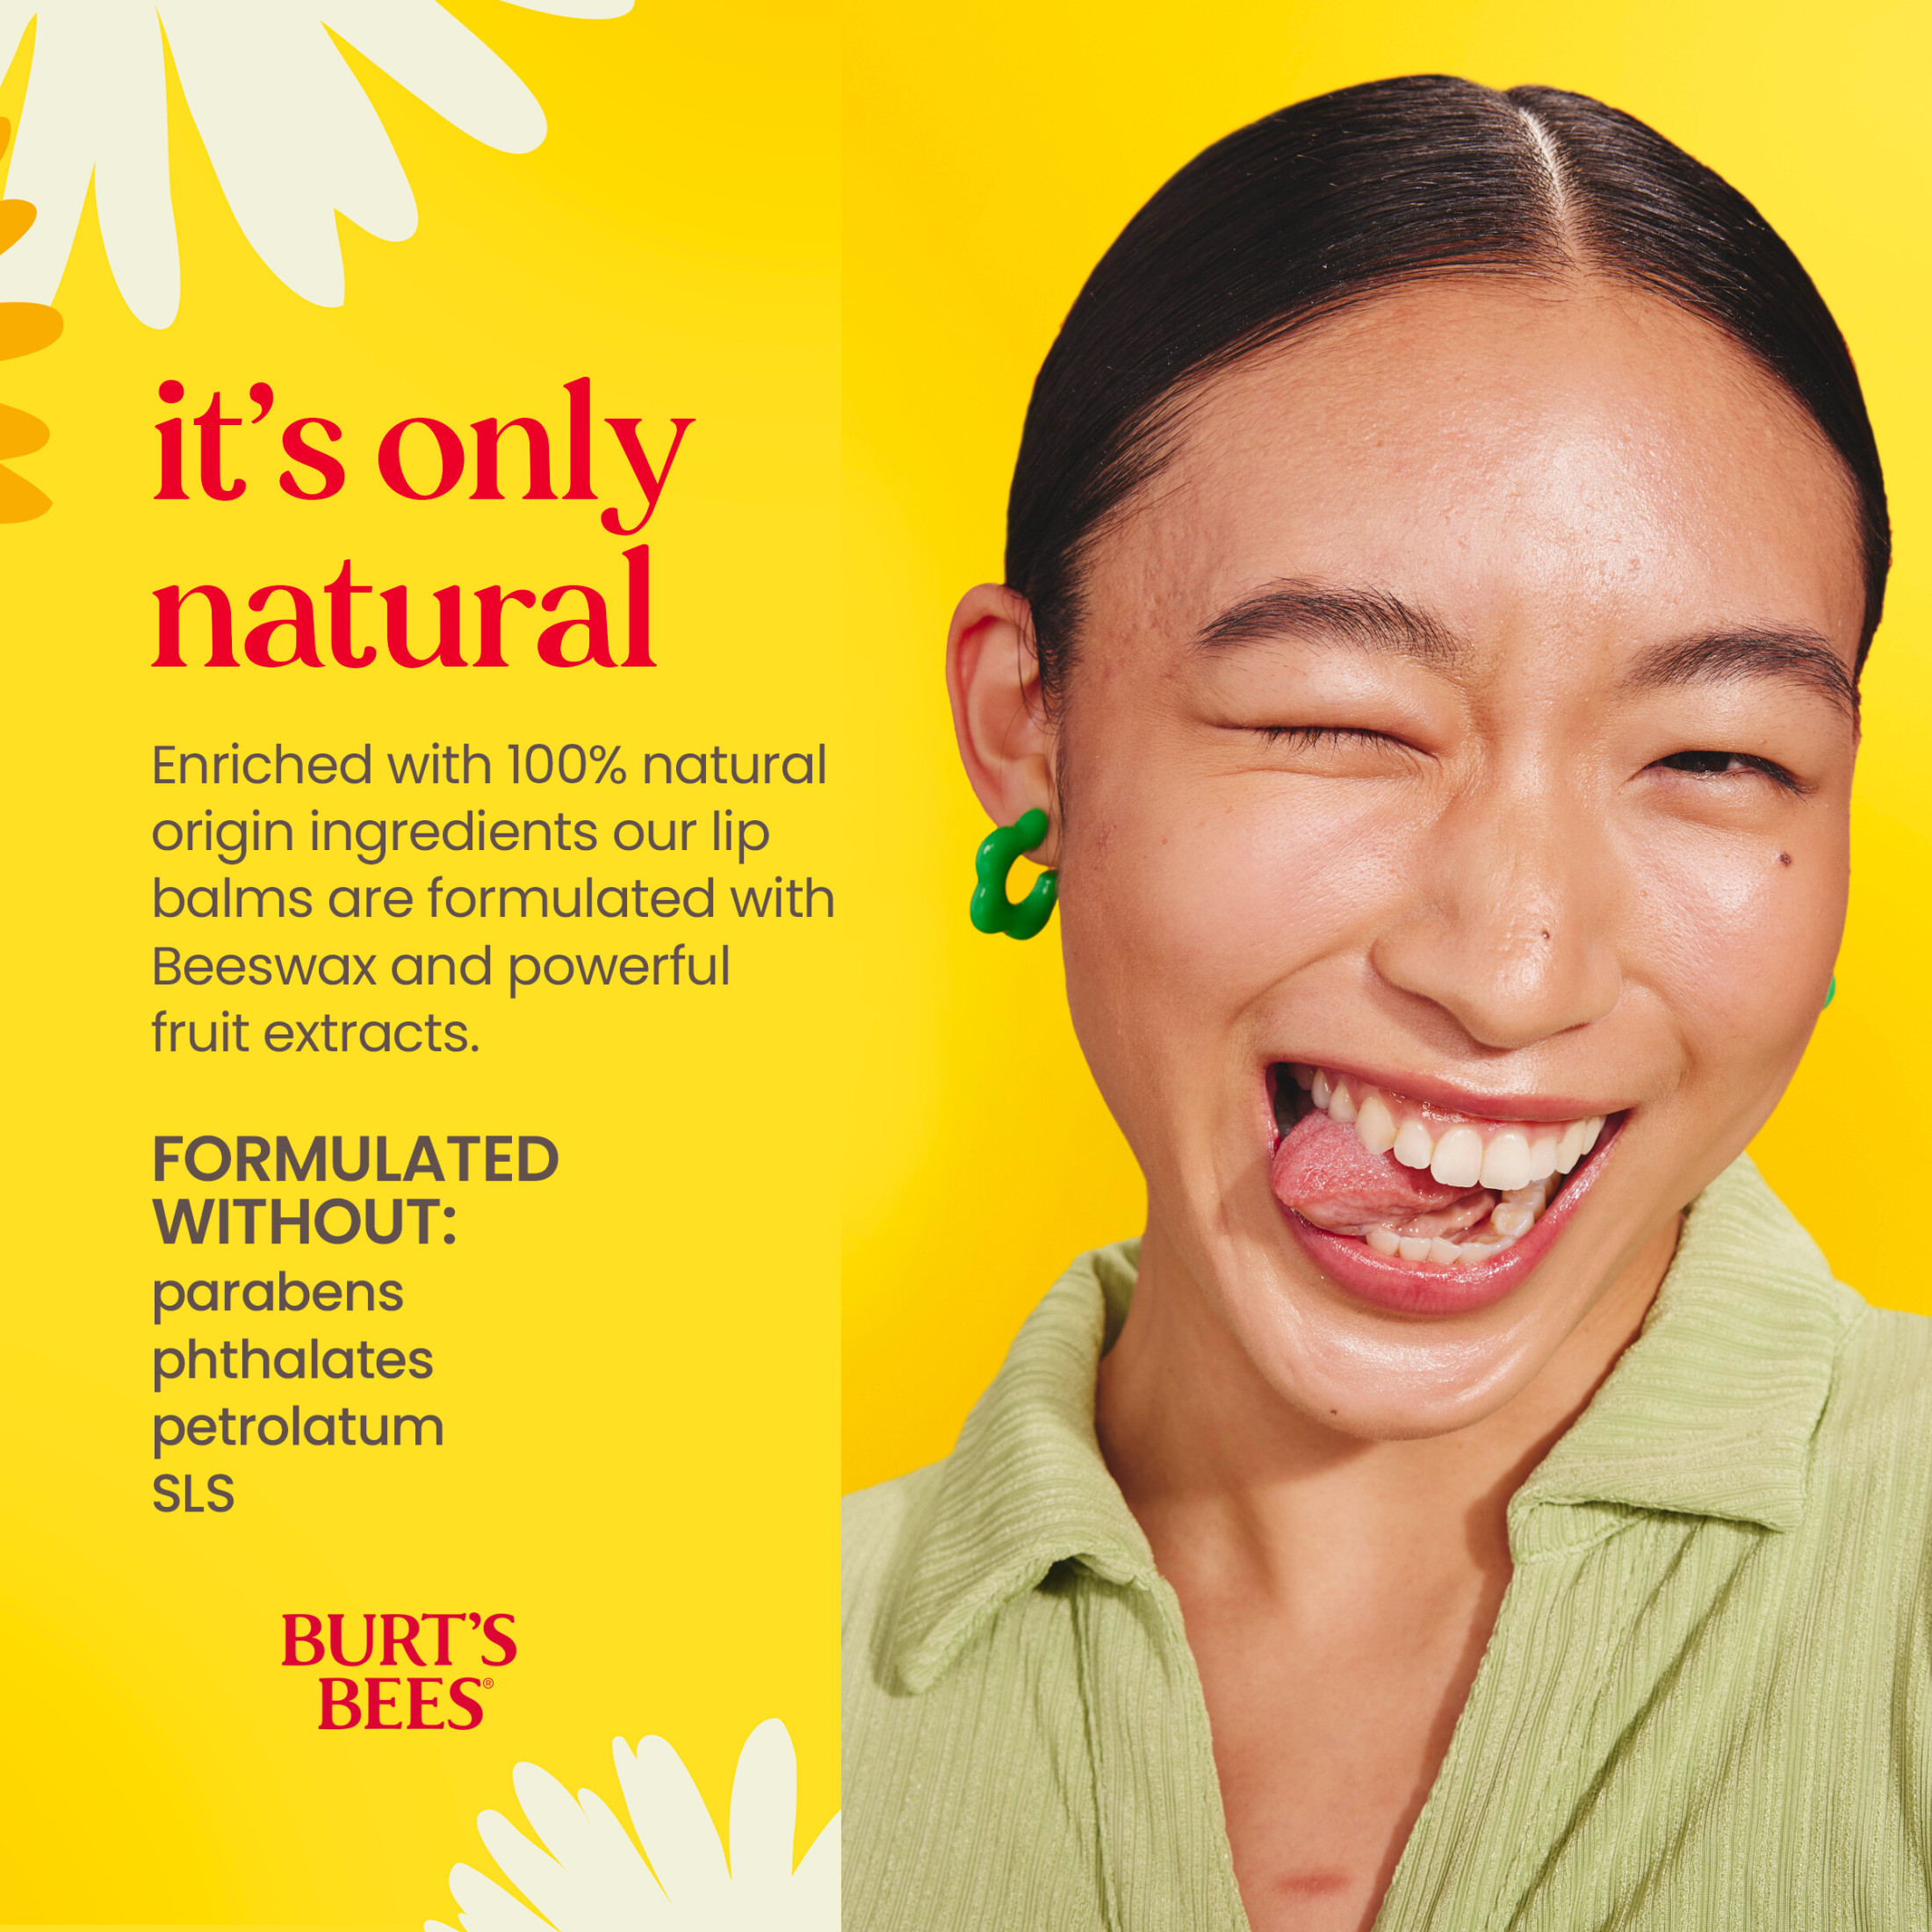 Burt's Bees 100% Natural Origin Moisturizing Lip Balm, with Beeswax, Vitamin E & Peppermint Oil, 3 Tubes - image 5 of 16